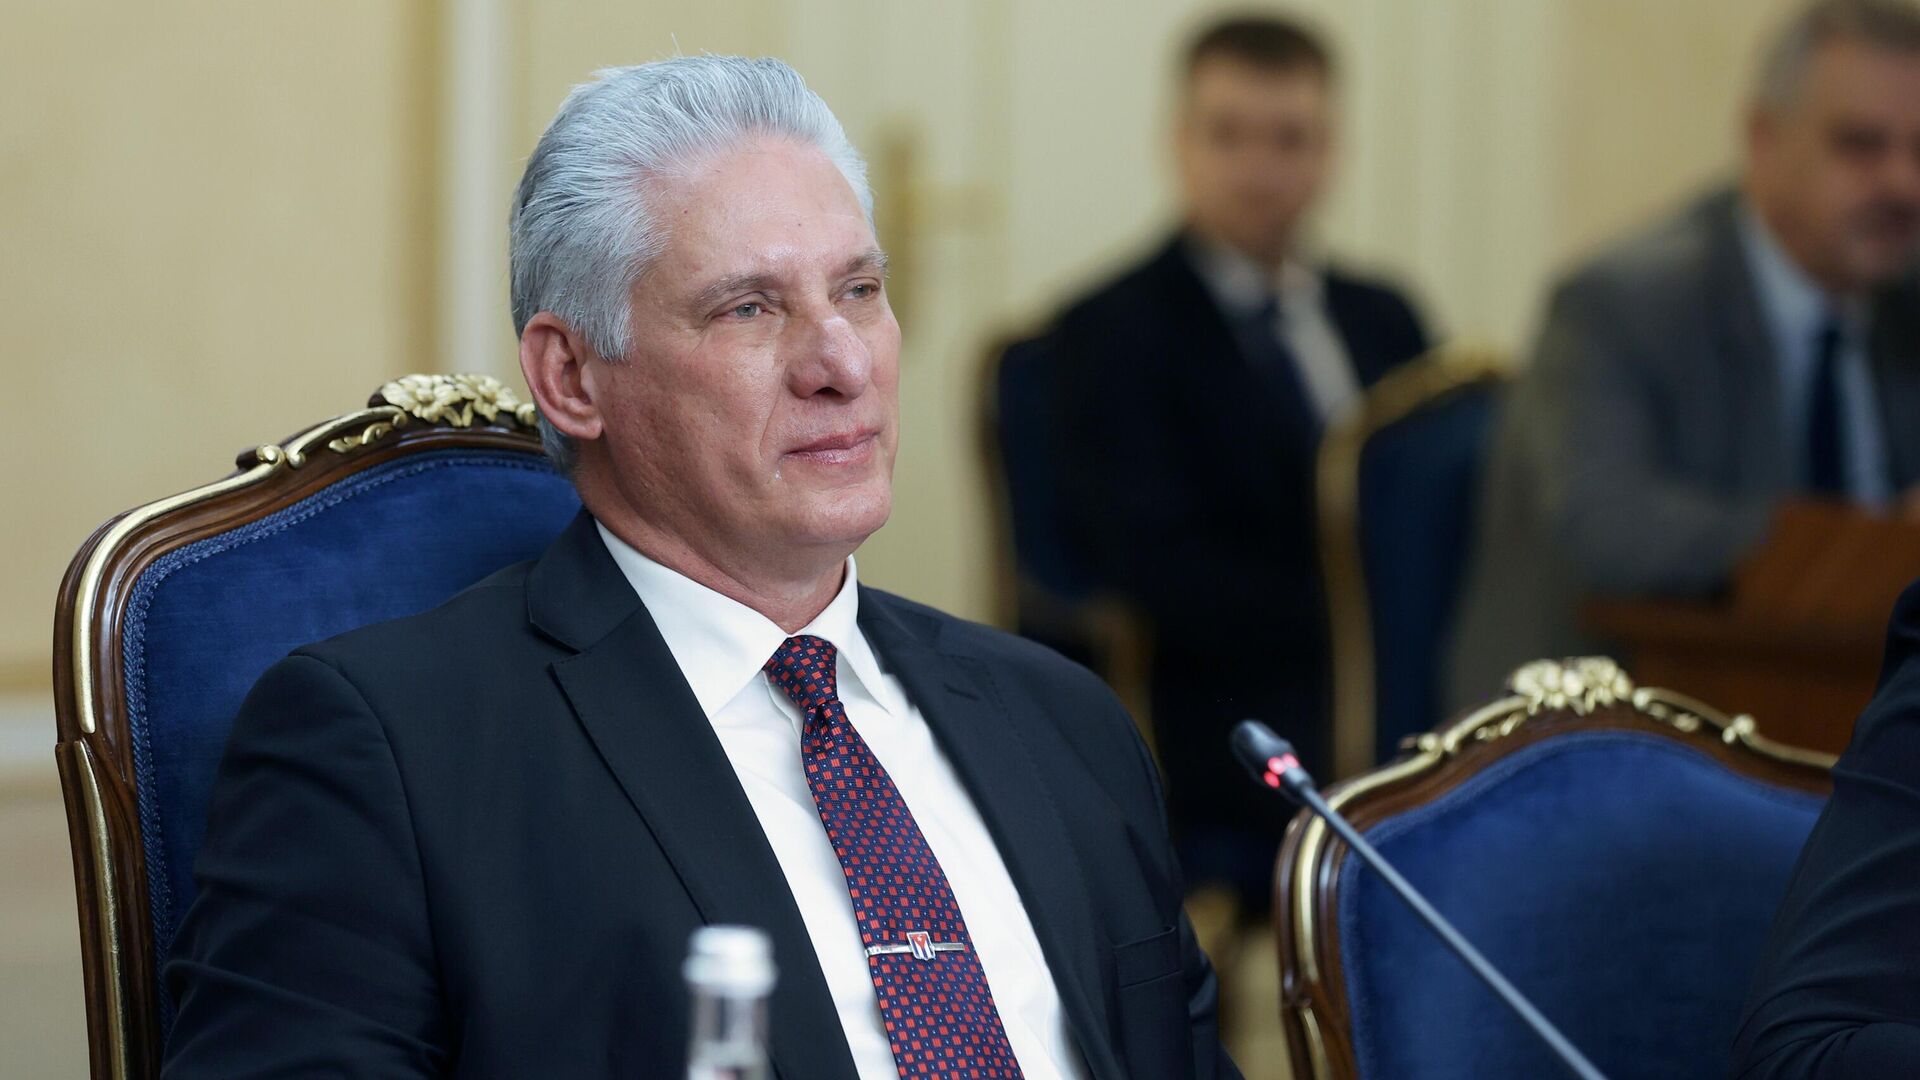 President of the Republic of Cuba Miguel Diaz-Canel Bermudez at a meeting with Chairman of the Federation Council of the Russian Federation Valentina Matvienko - Sputnik International, 1920, 24.08.2023